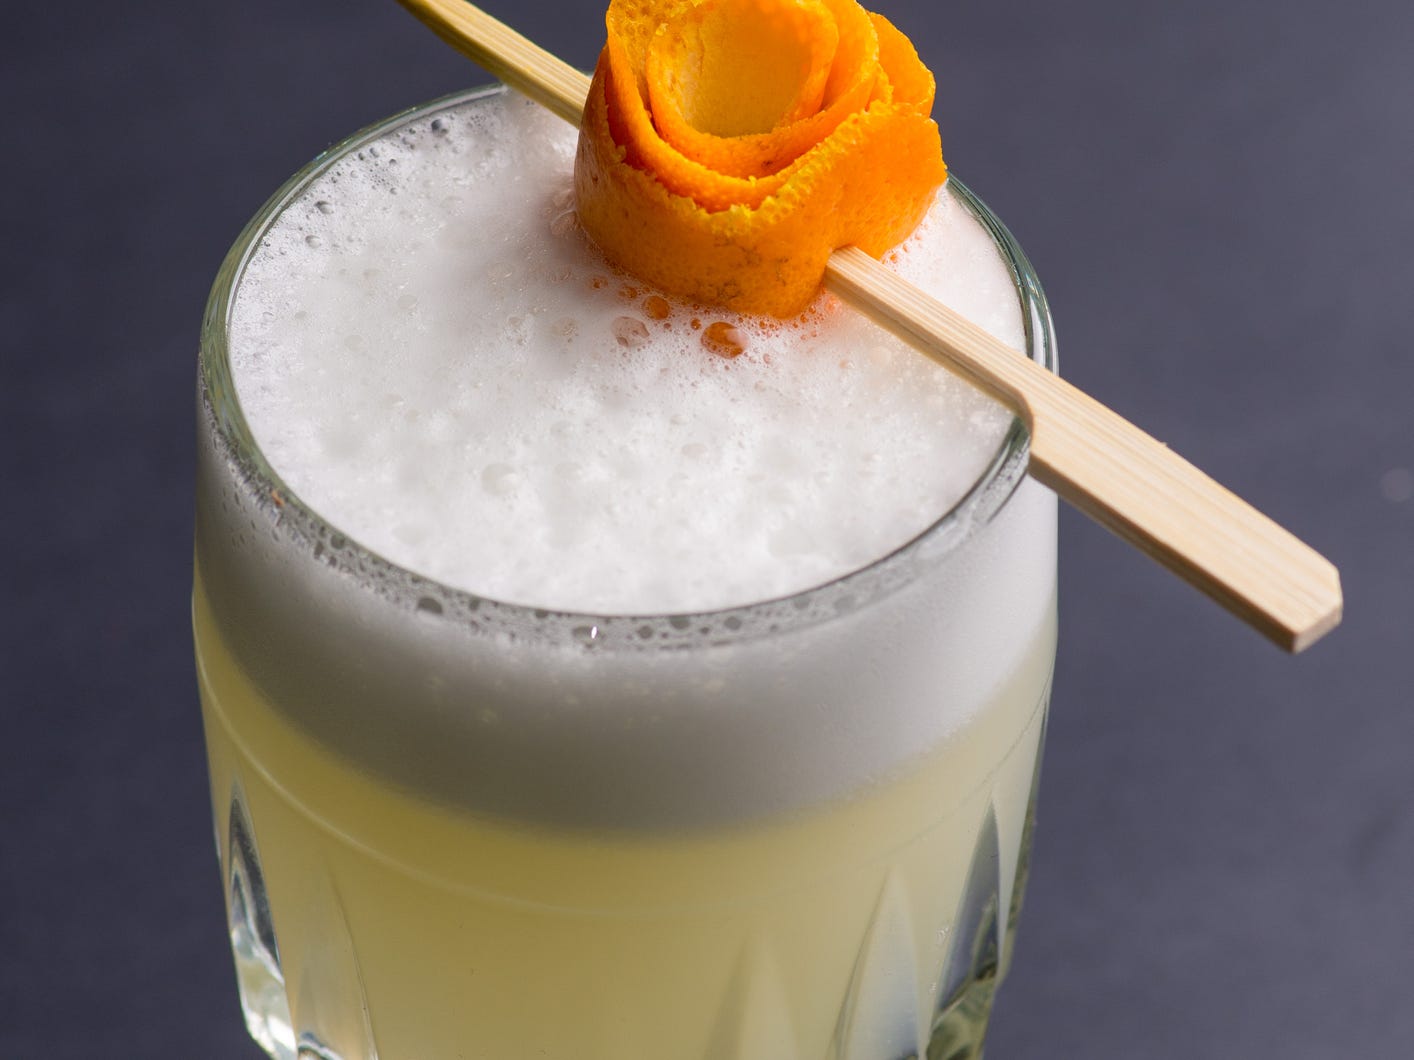 A white dragon cocktail with a head of egg white foam garnished with a skewered orange peel